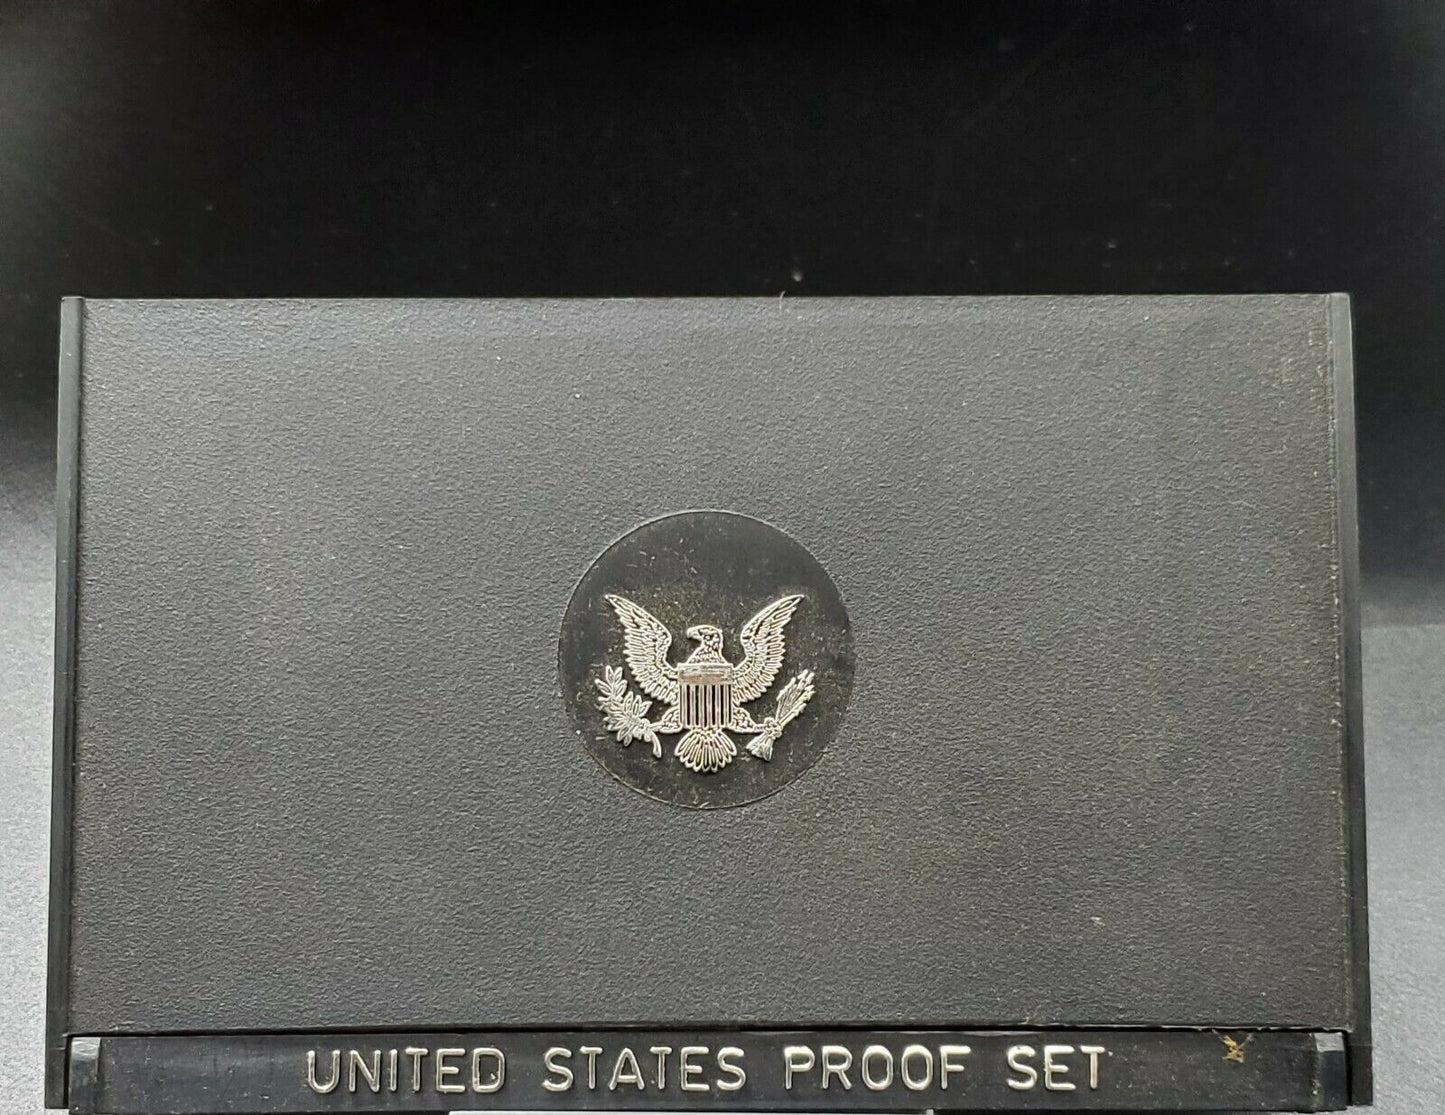 1974 S US Proof Clad Coin Set OGP Combo Shipping Discounts RobinsonsCoinTown